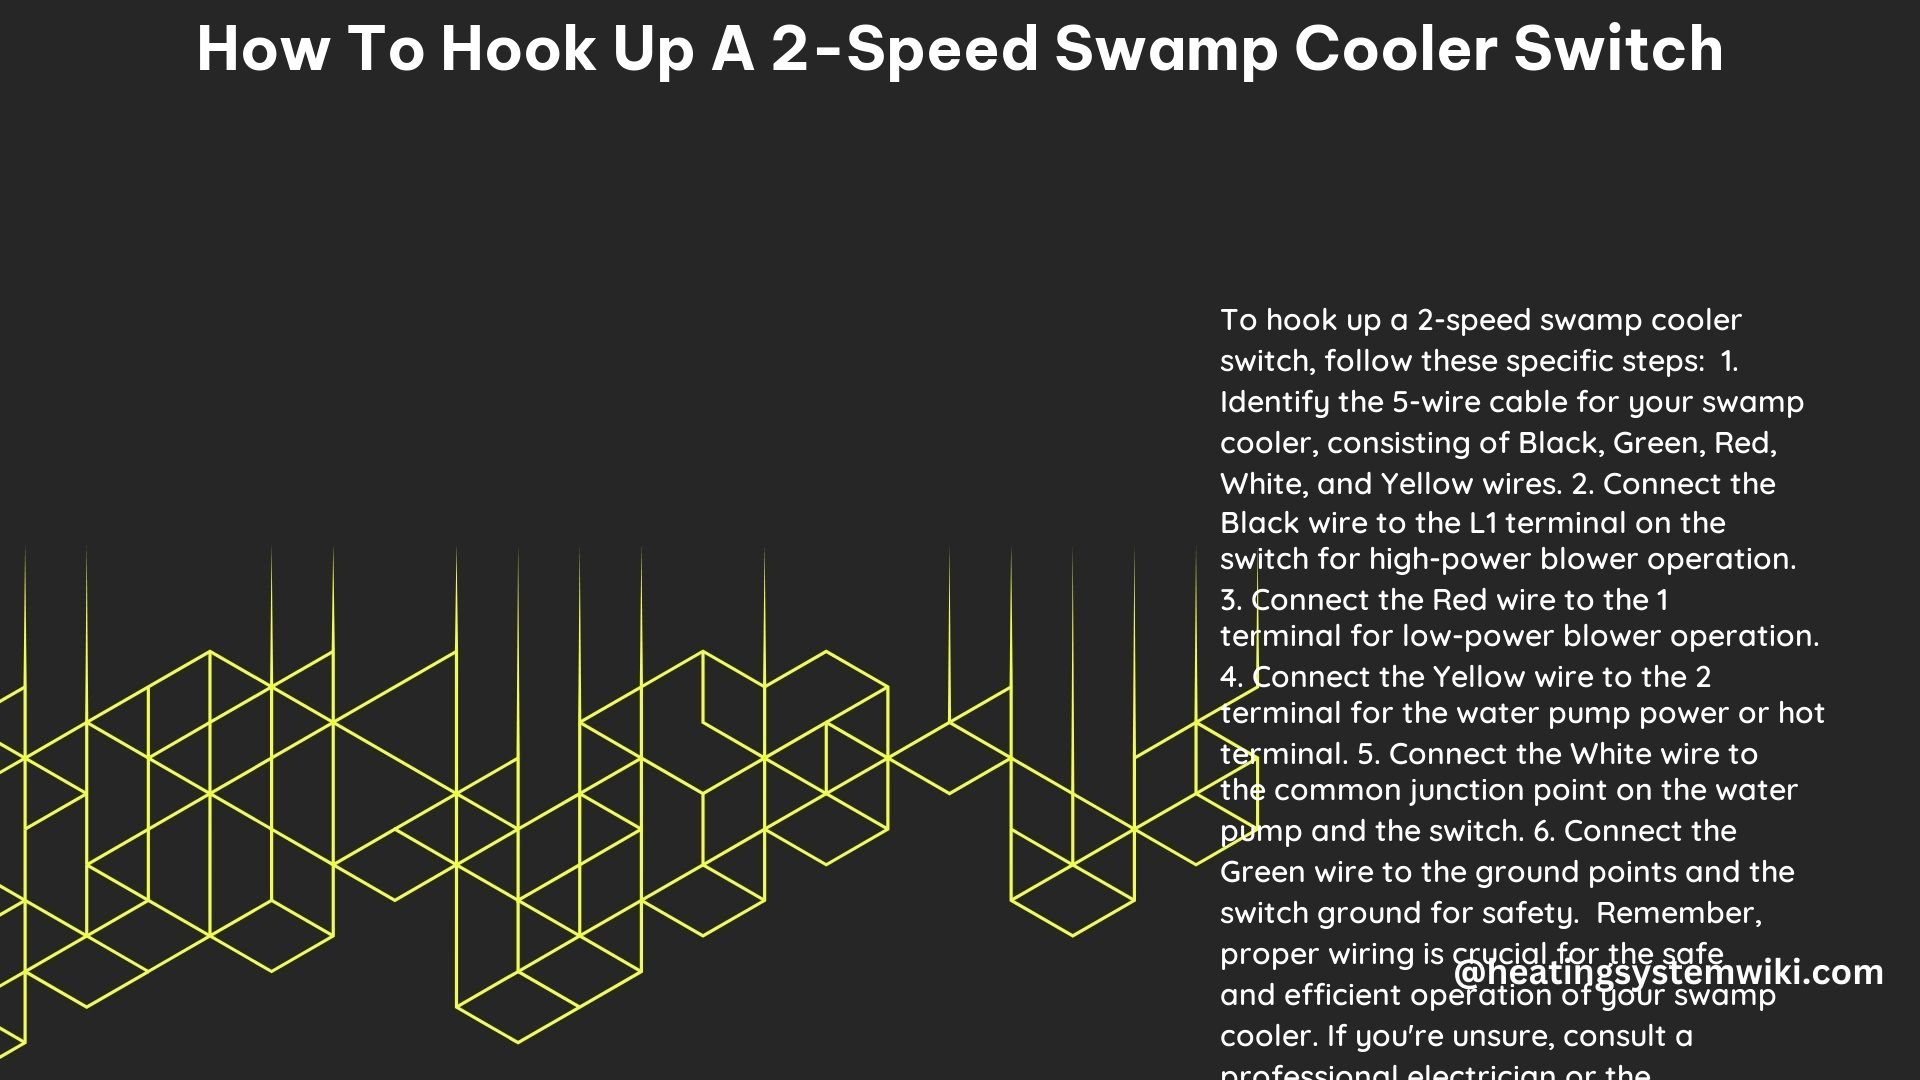 How to Hook up a 2-Speed Swamp Cooler Switch